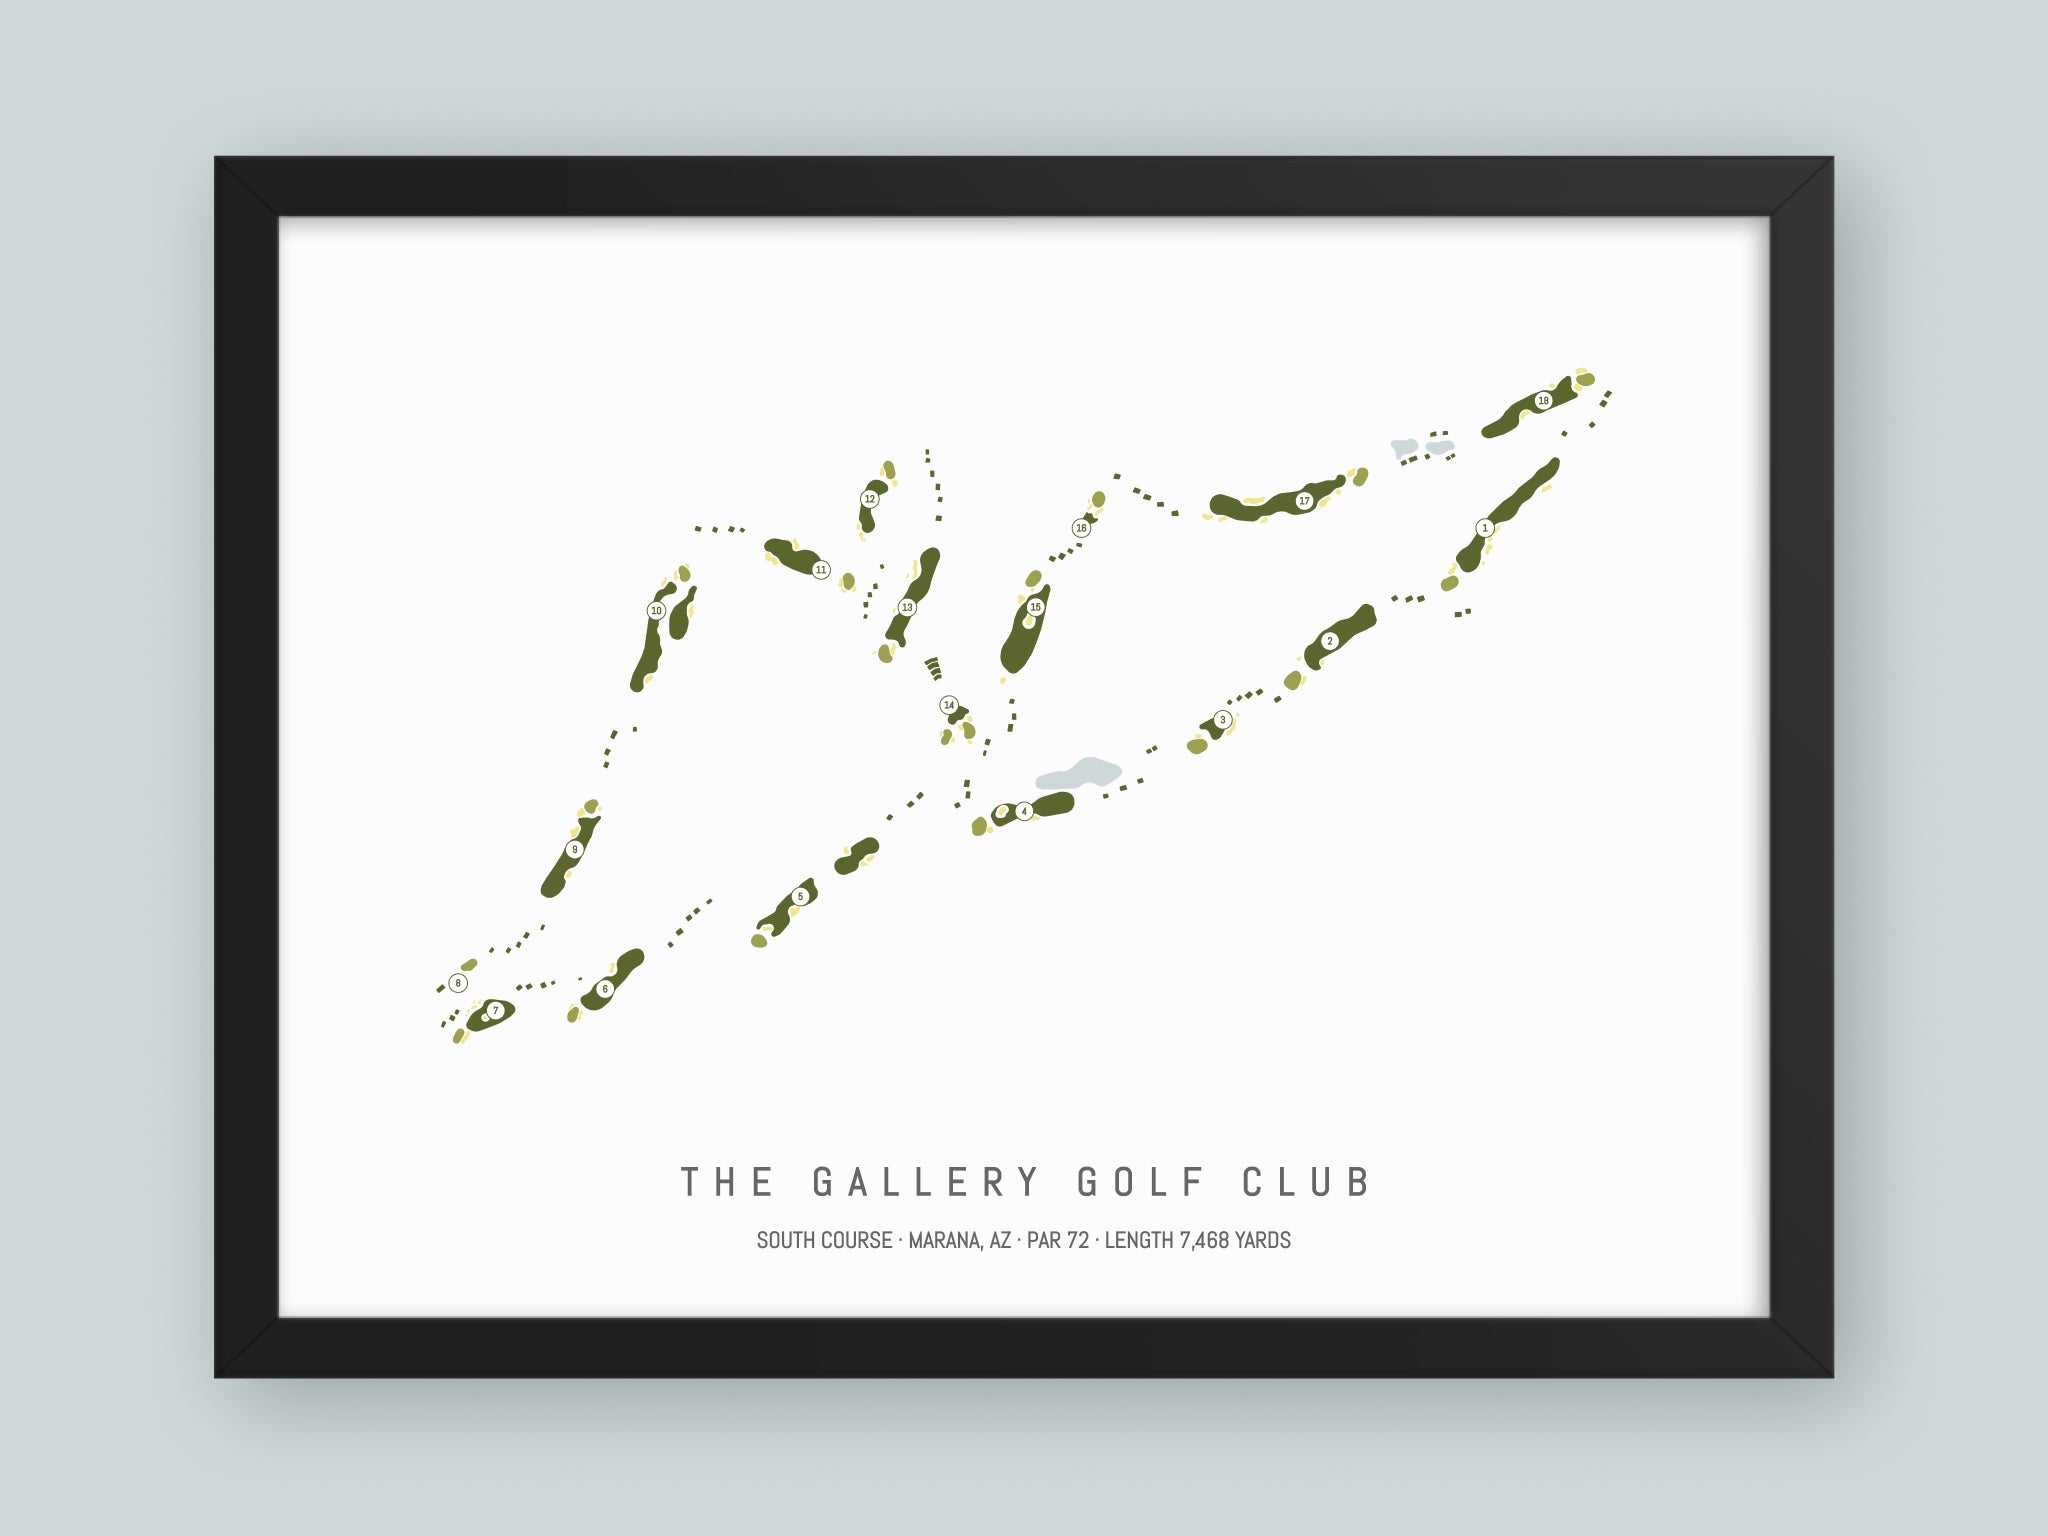 The-Gallery-Golf-Club-South-Course-AZ--Black-Frame-24x18-With-Hole-Numbers